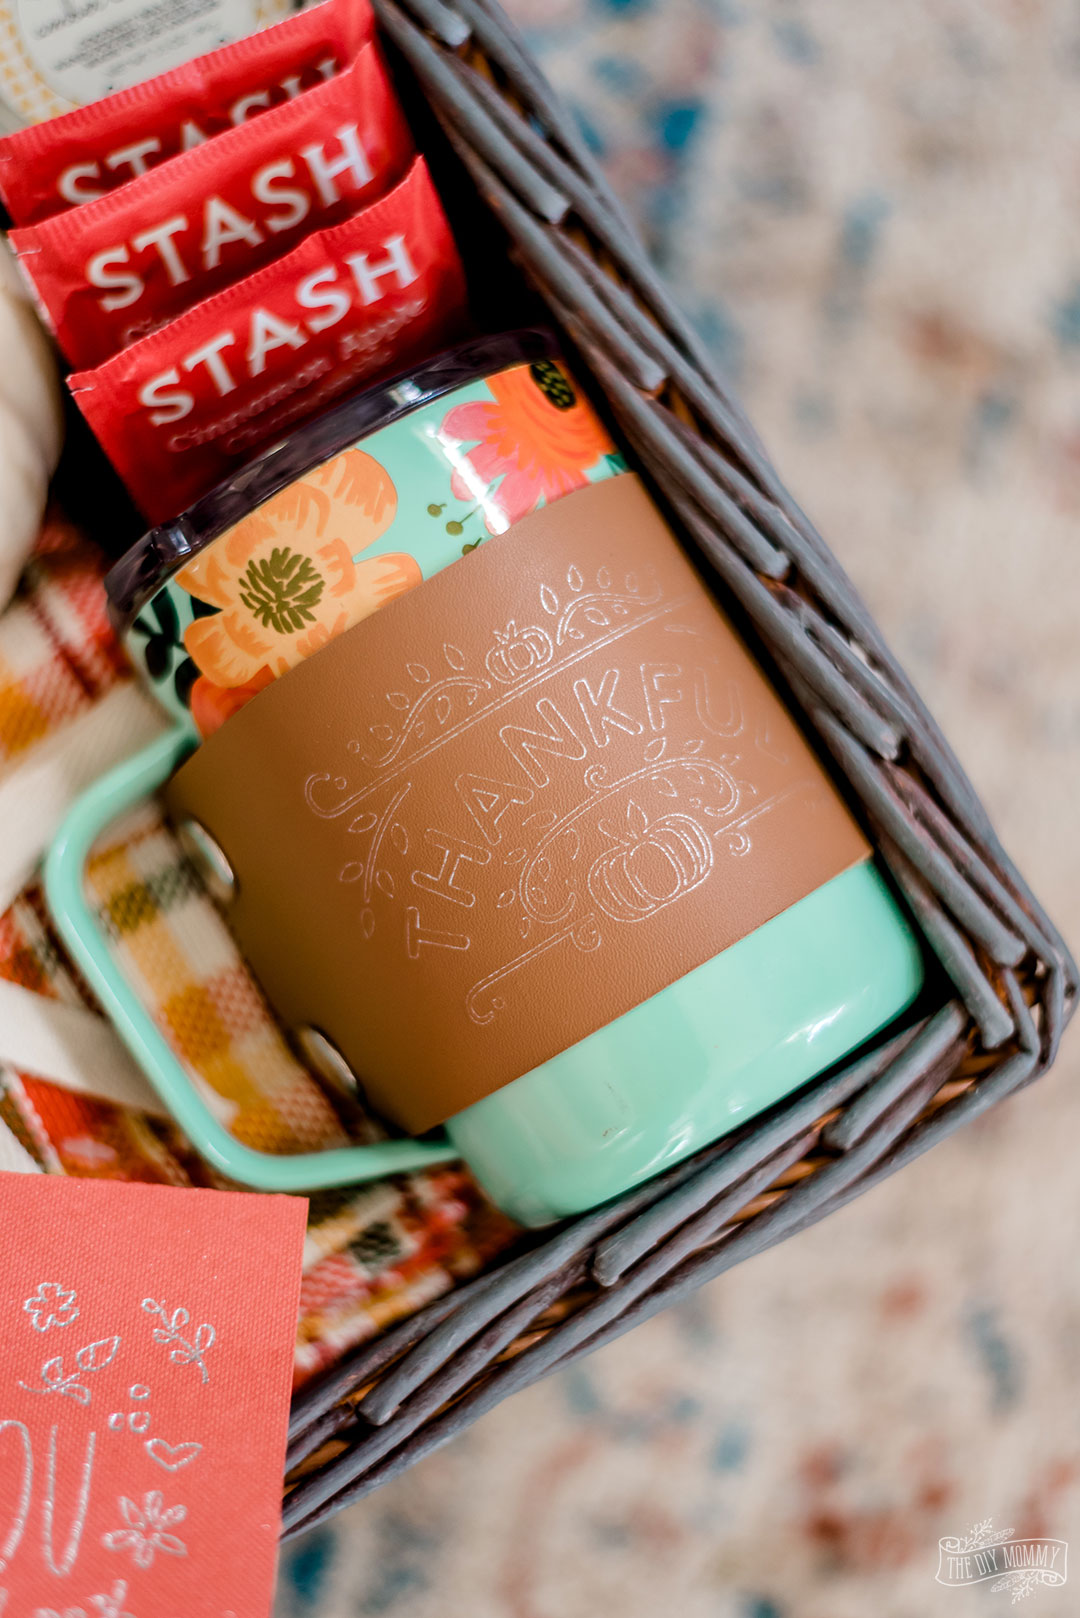 This simple Fall thank you gift basket makes a great gift to show appreciation for someone special. Learn how to make a foil effect Thank You card and leather mug cozy with foil lettering.